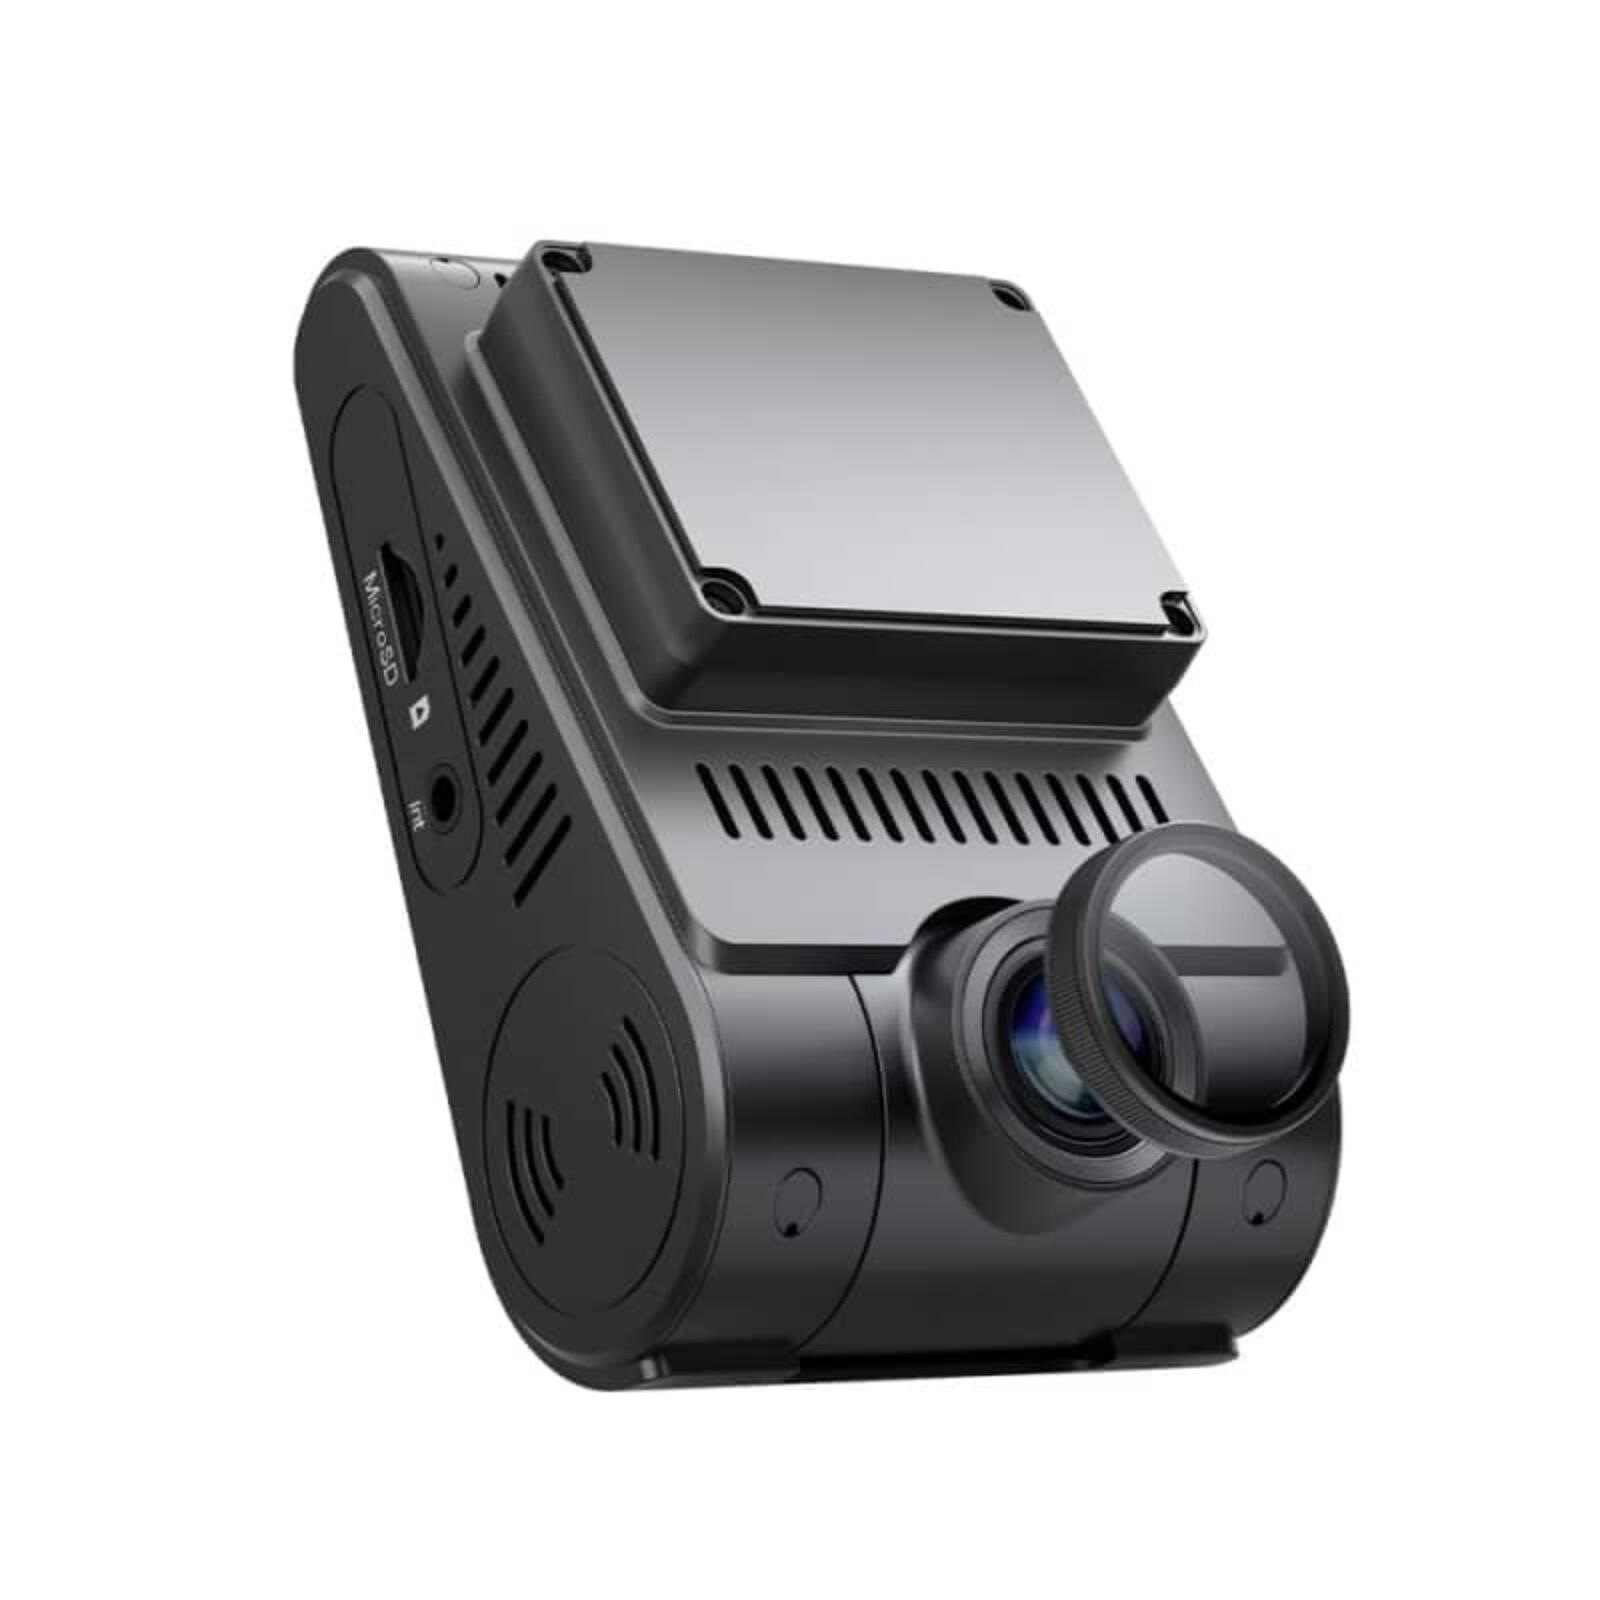 Viofo A229 Pro 2CH Dash Cam 4K Front 2K Rear Starvis 2 GPS WIFI HDR Dual Camera